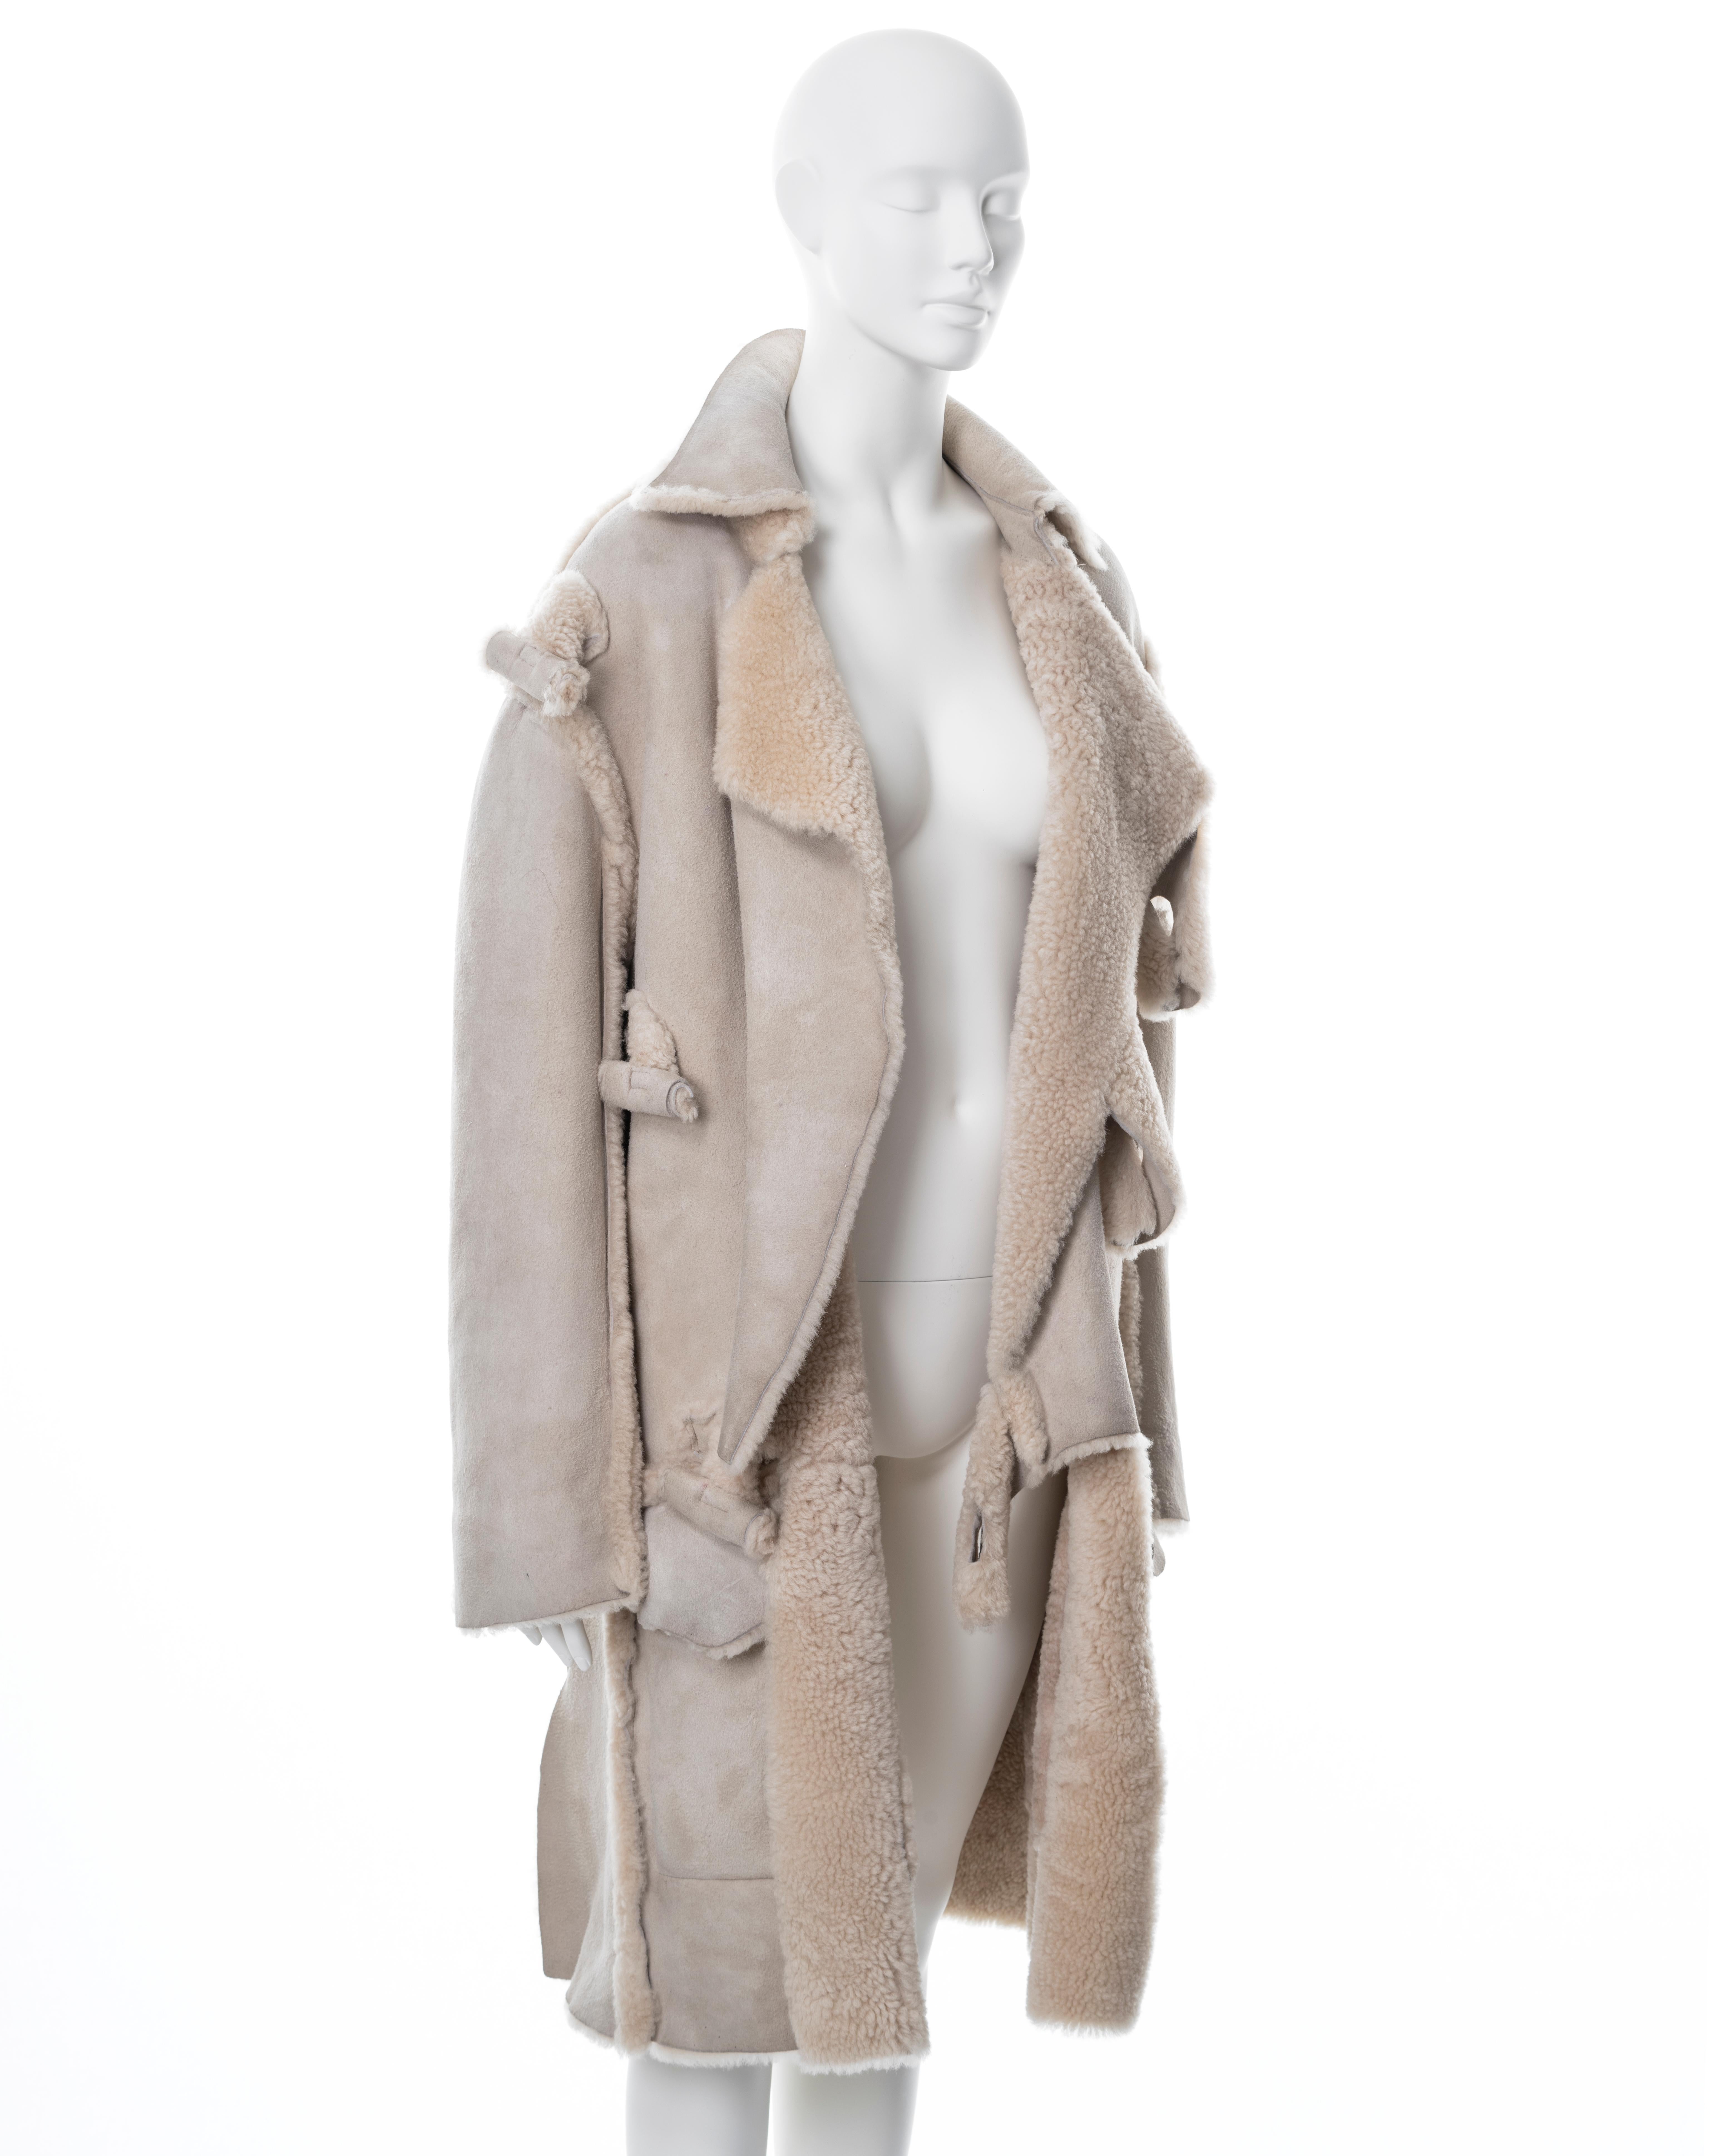 Worlds End by Vivienne Westwood and Malcolm McLaren 'Buffalo' coat, fw 1982 For Sale 1